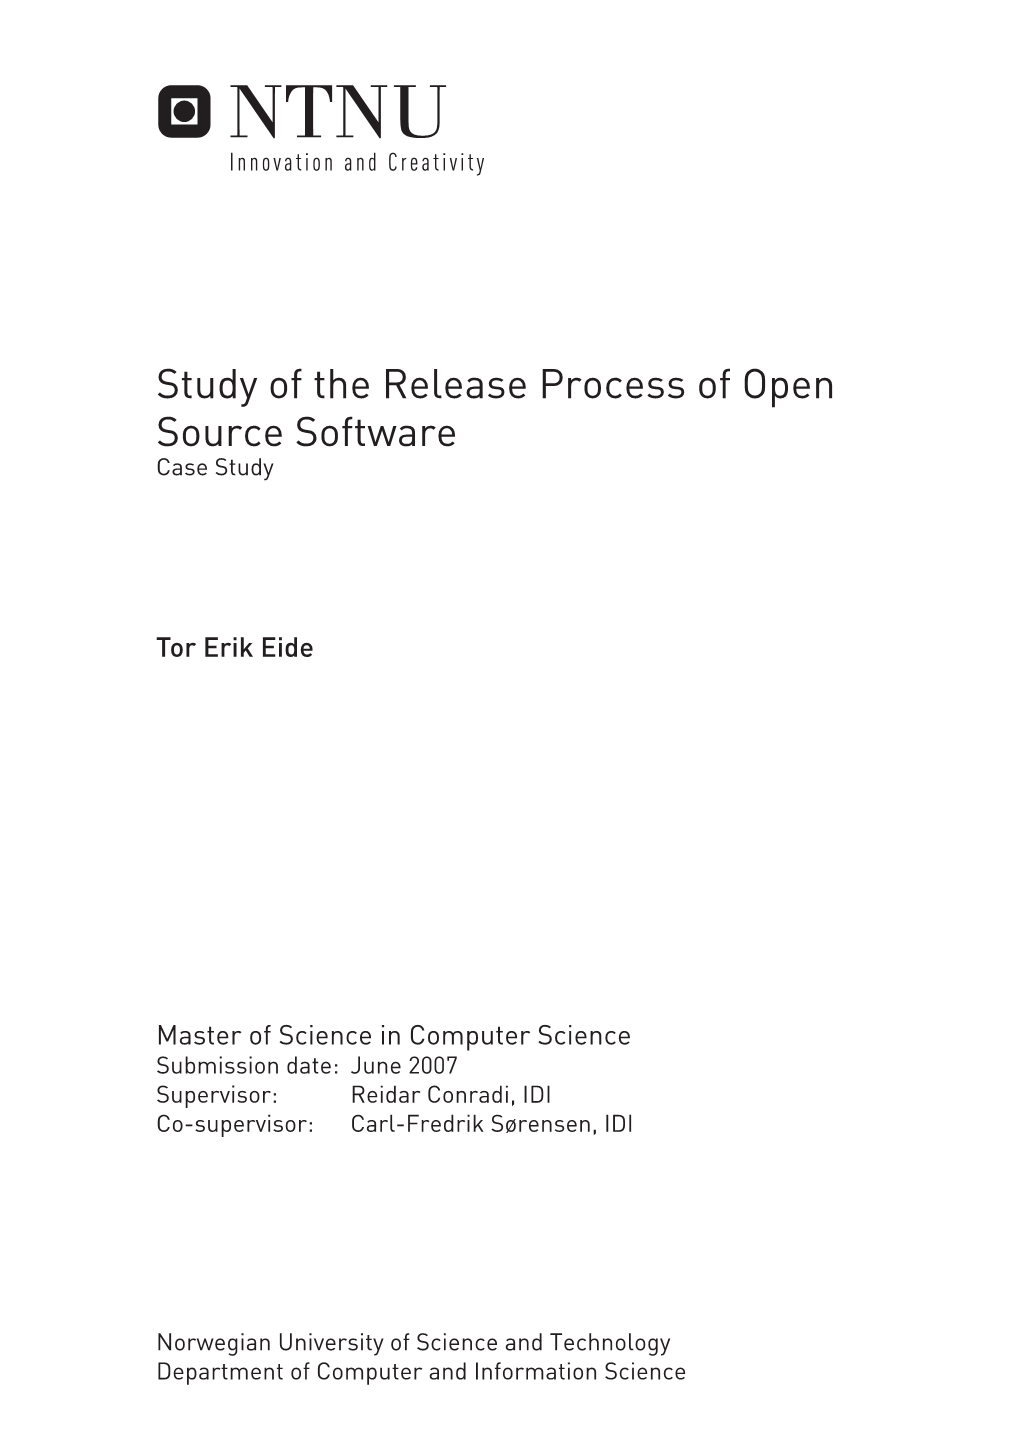 Study of the Release Process of Open Source Software Case Study